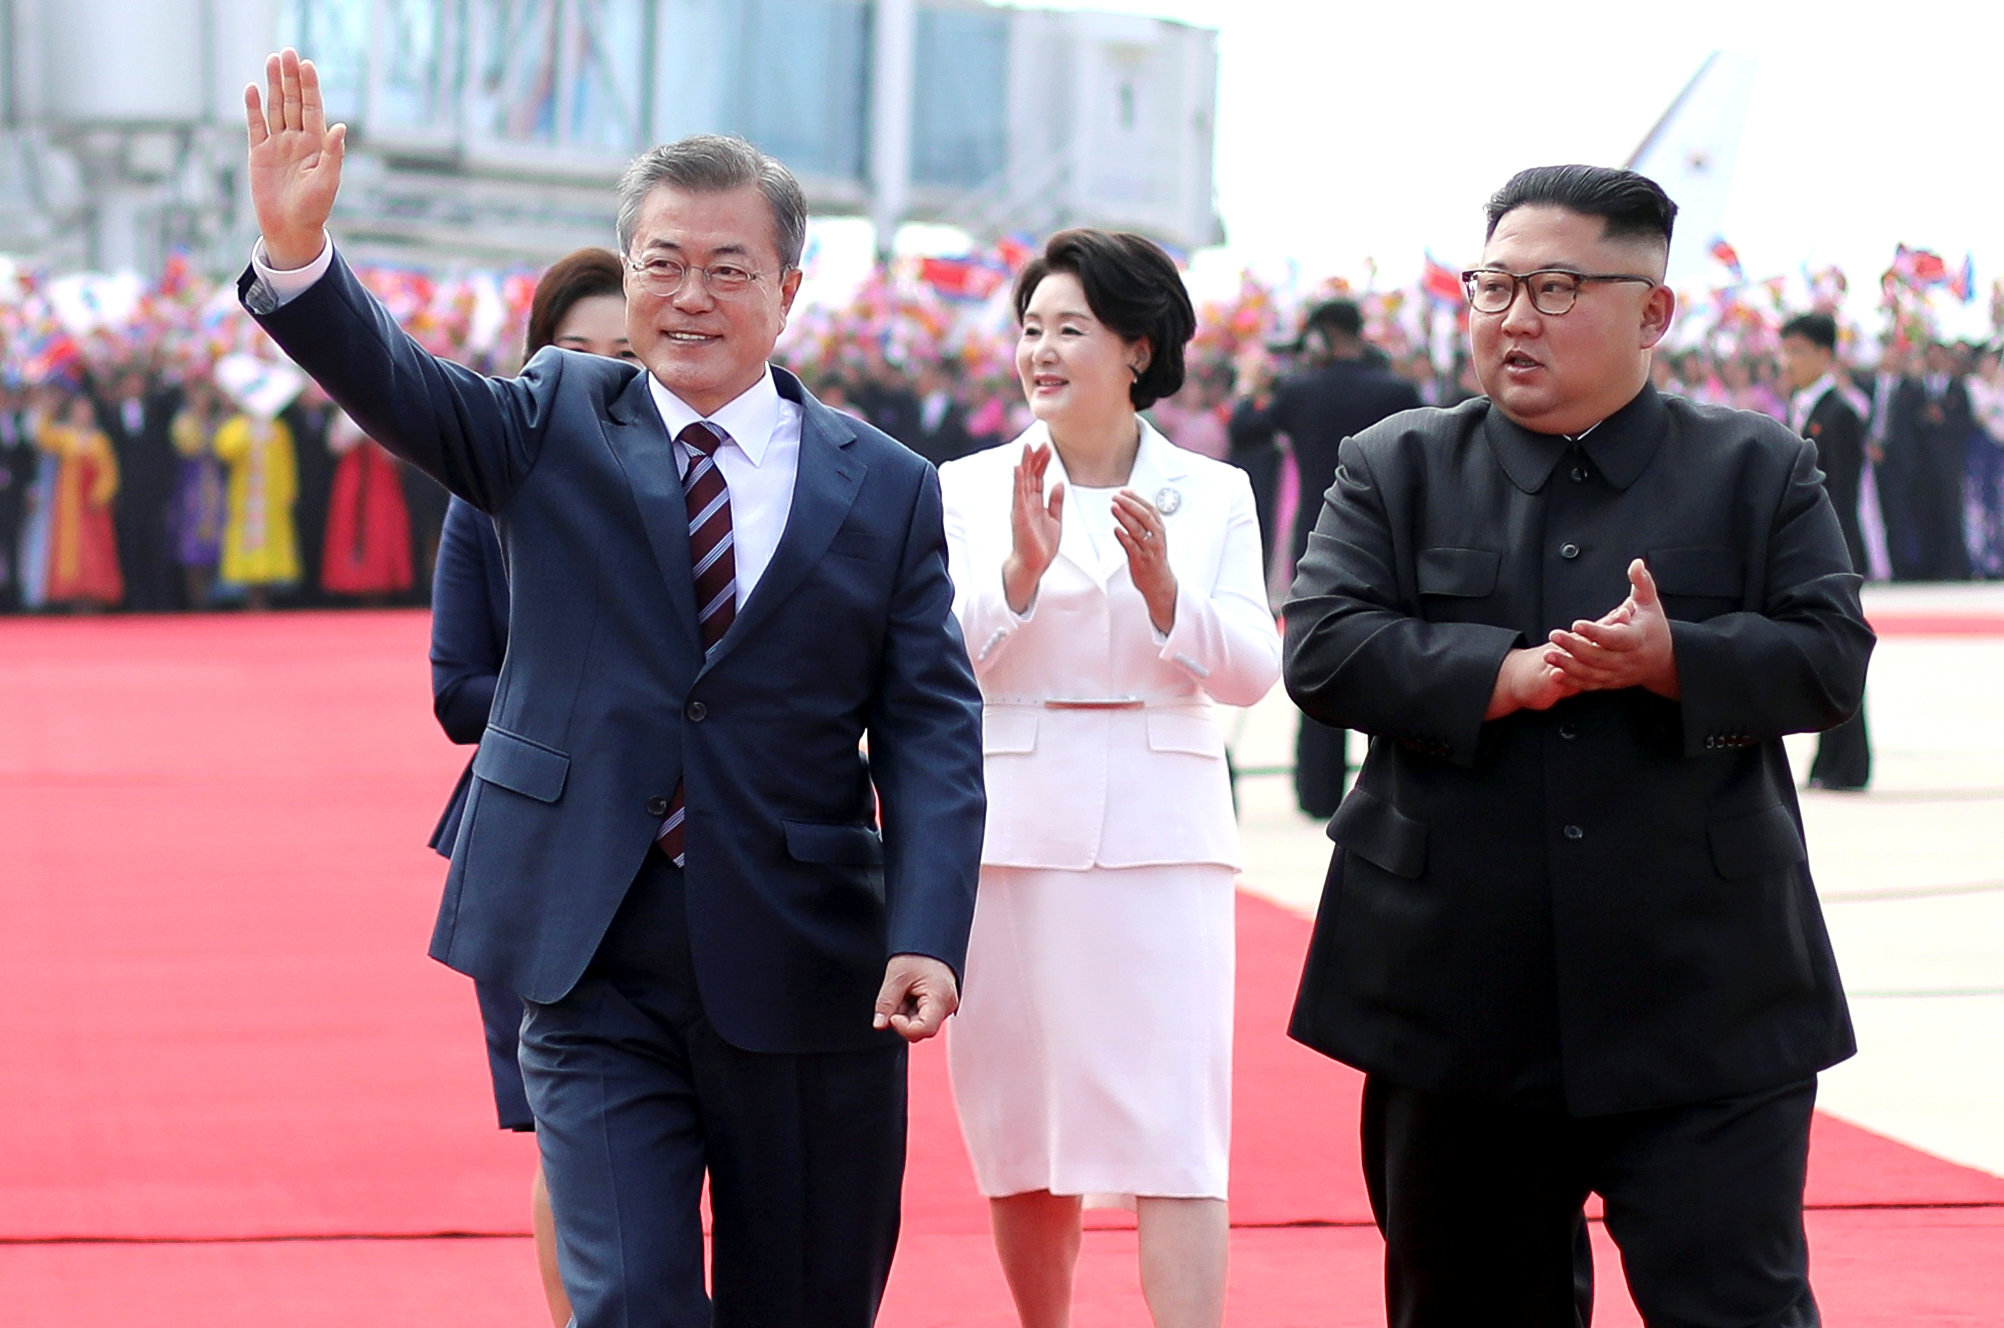 South Korean President Moon Jae-in and North Korean leader Kim Jong Un attend an official welcome ceremony at Pyongyang Sunan International Airport